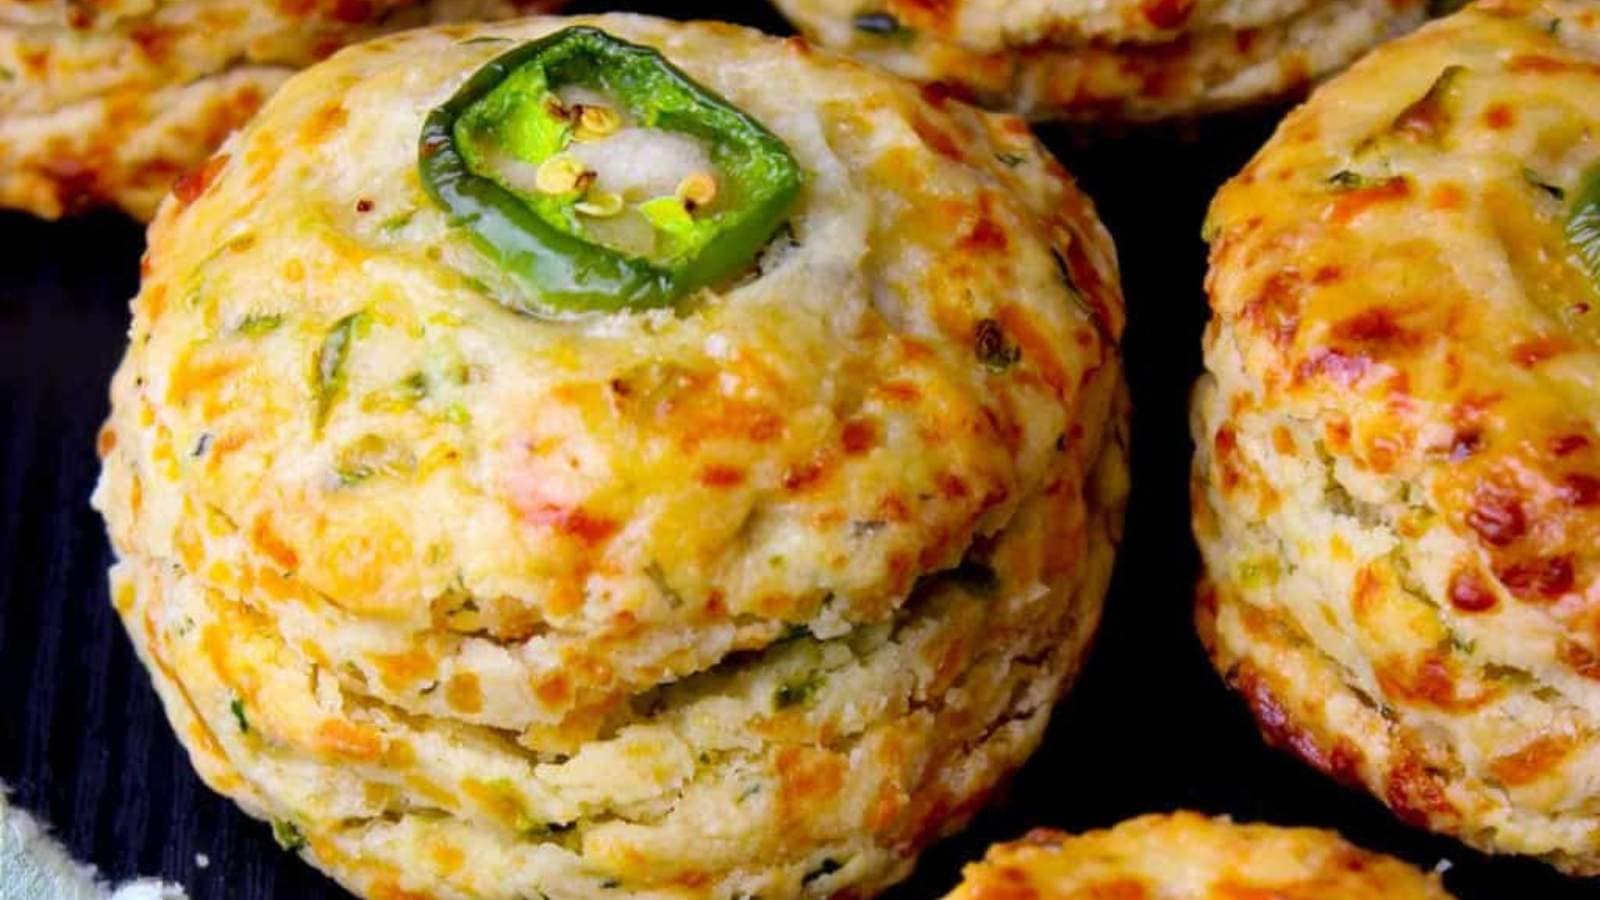 Jalapeno Cheddar Biscuits recipe by Greedy Eats.